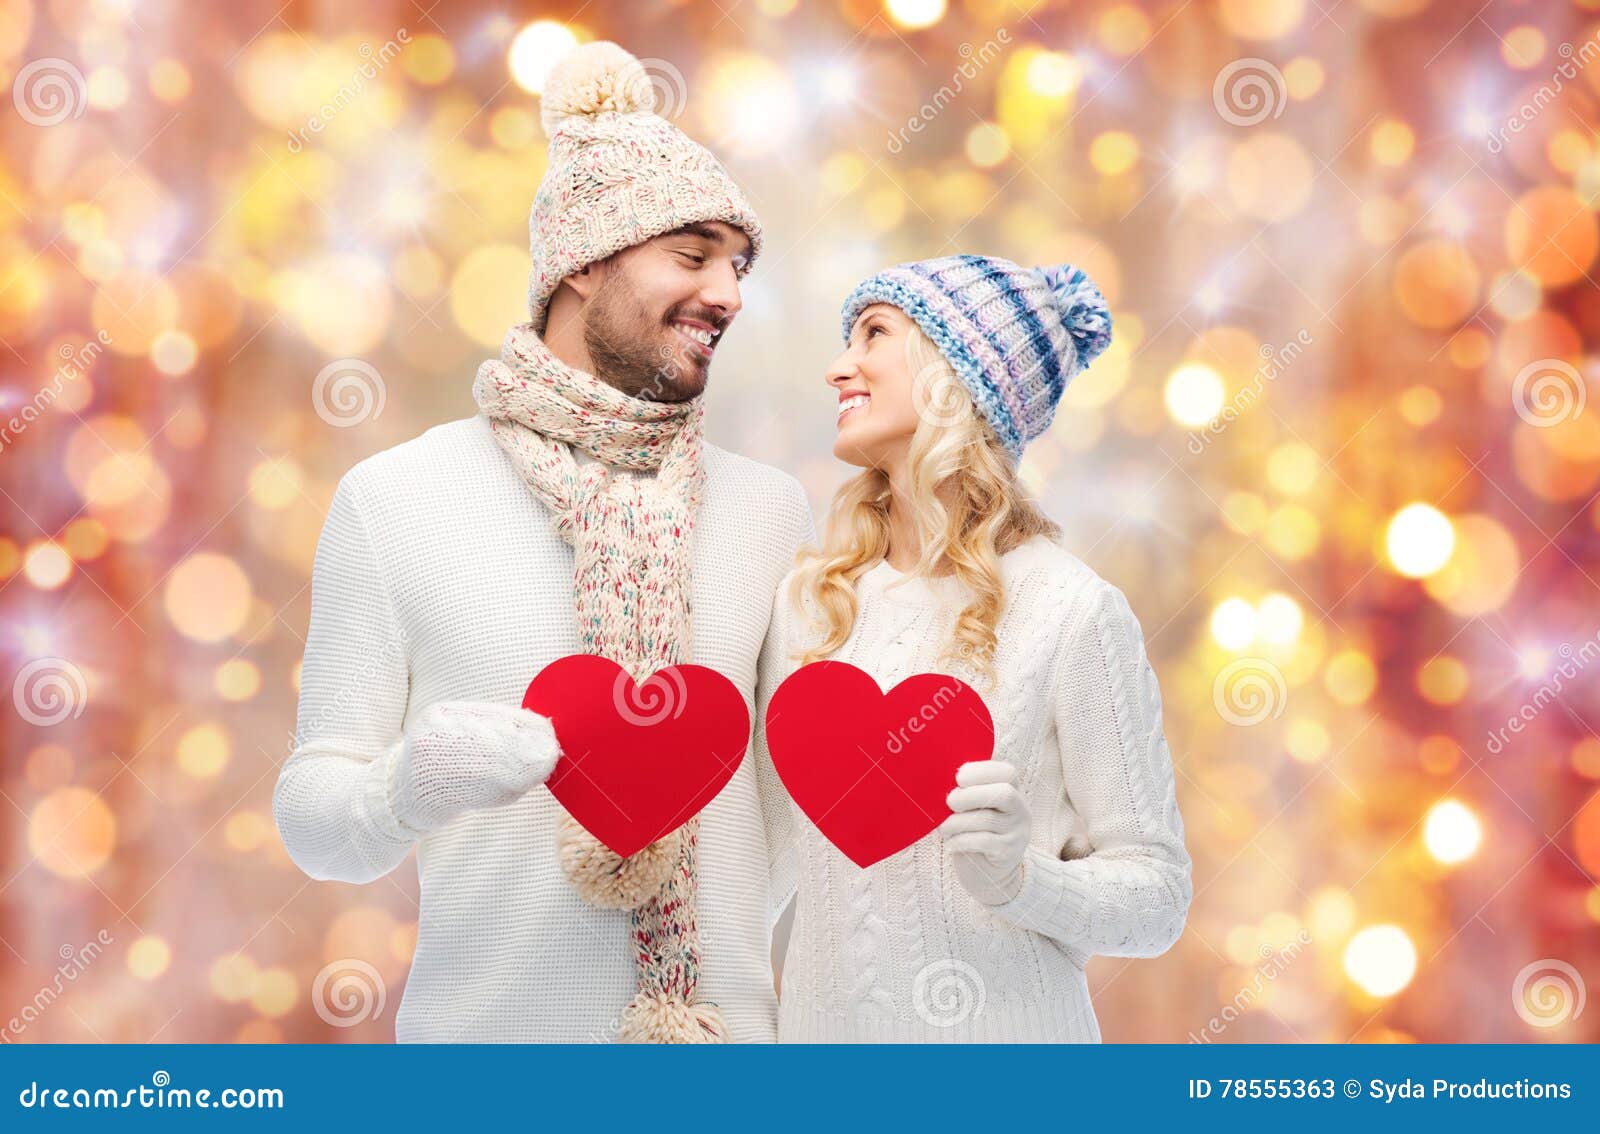 Smiling Couple in Winter Clothes with Red Hearts Stock Image - Image of ...